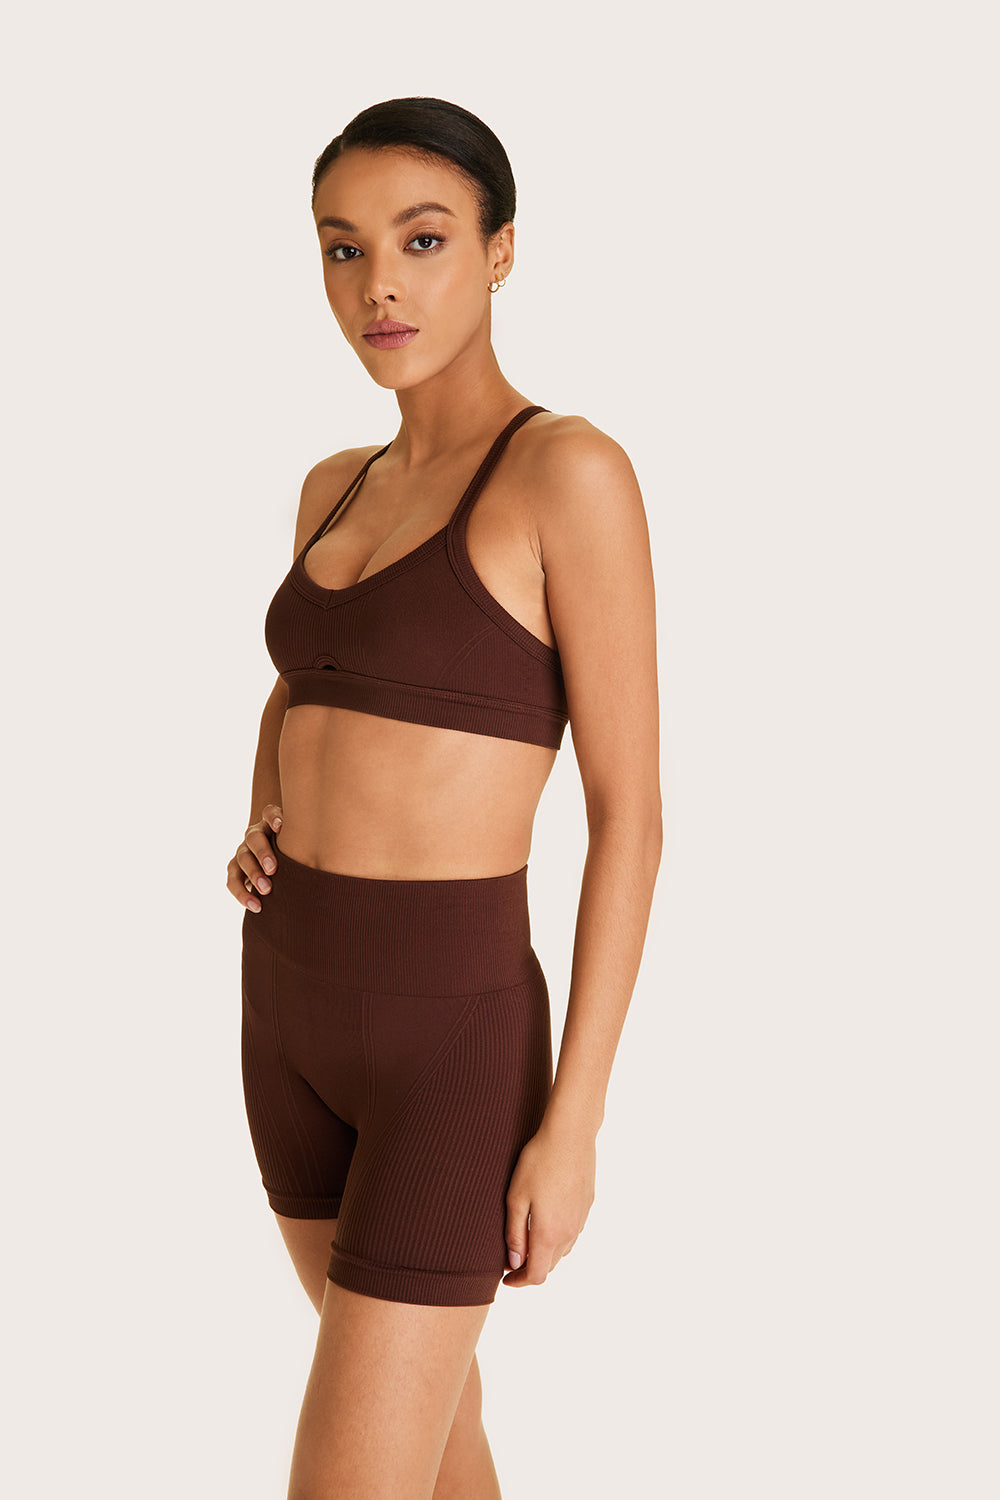 Looking to upgrade your Summer running gear? Check out our tights, shorts & sports  bras.